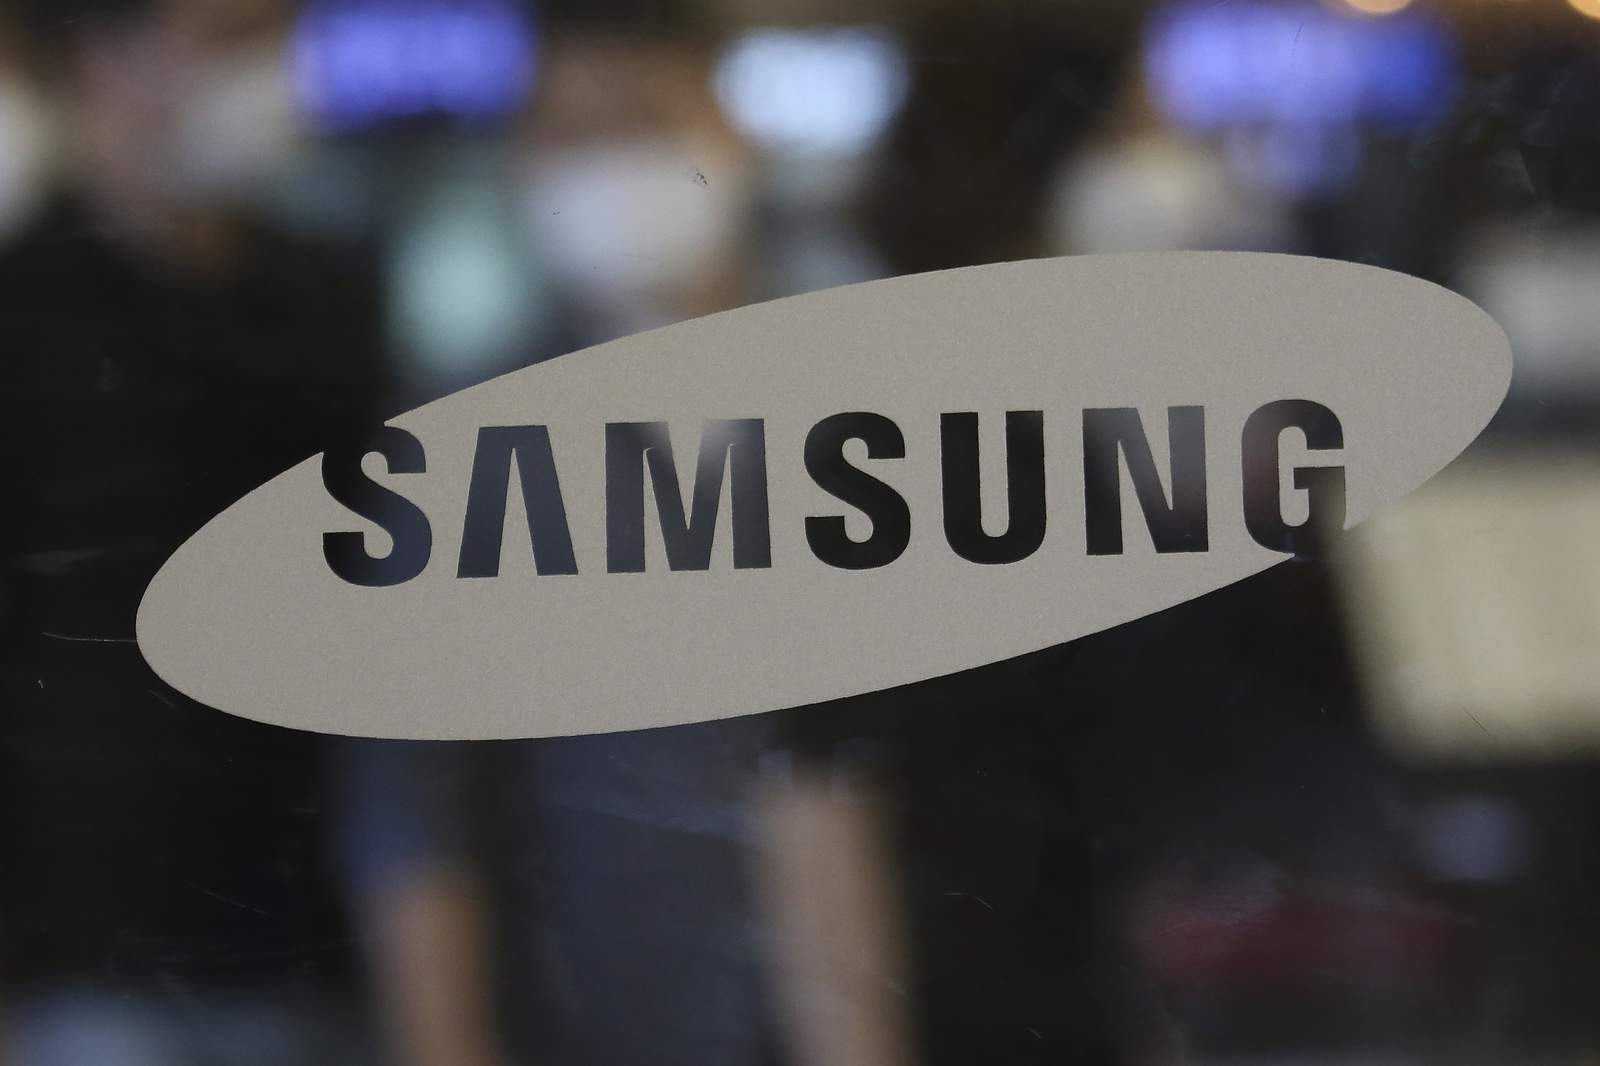 Samsung's new phones test consumer demand for pricey gadgets